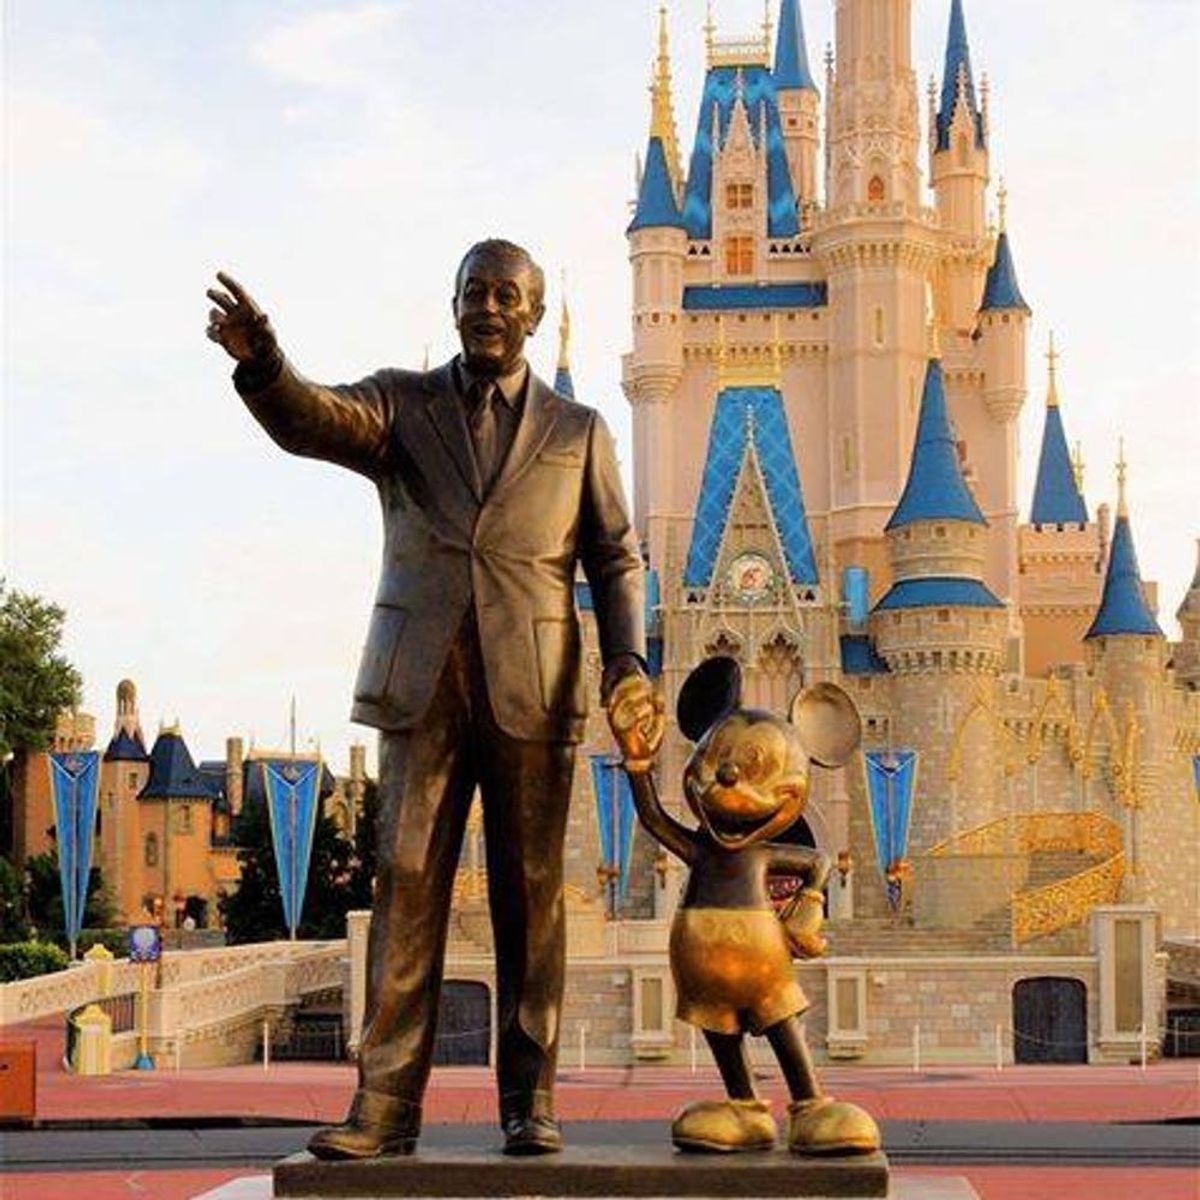 Disney Pledges to Donate $1M to the Victims of the Orlando Tragedy